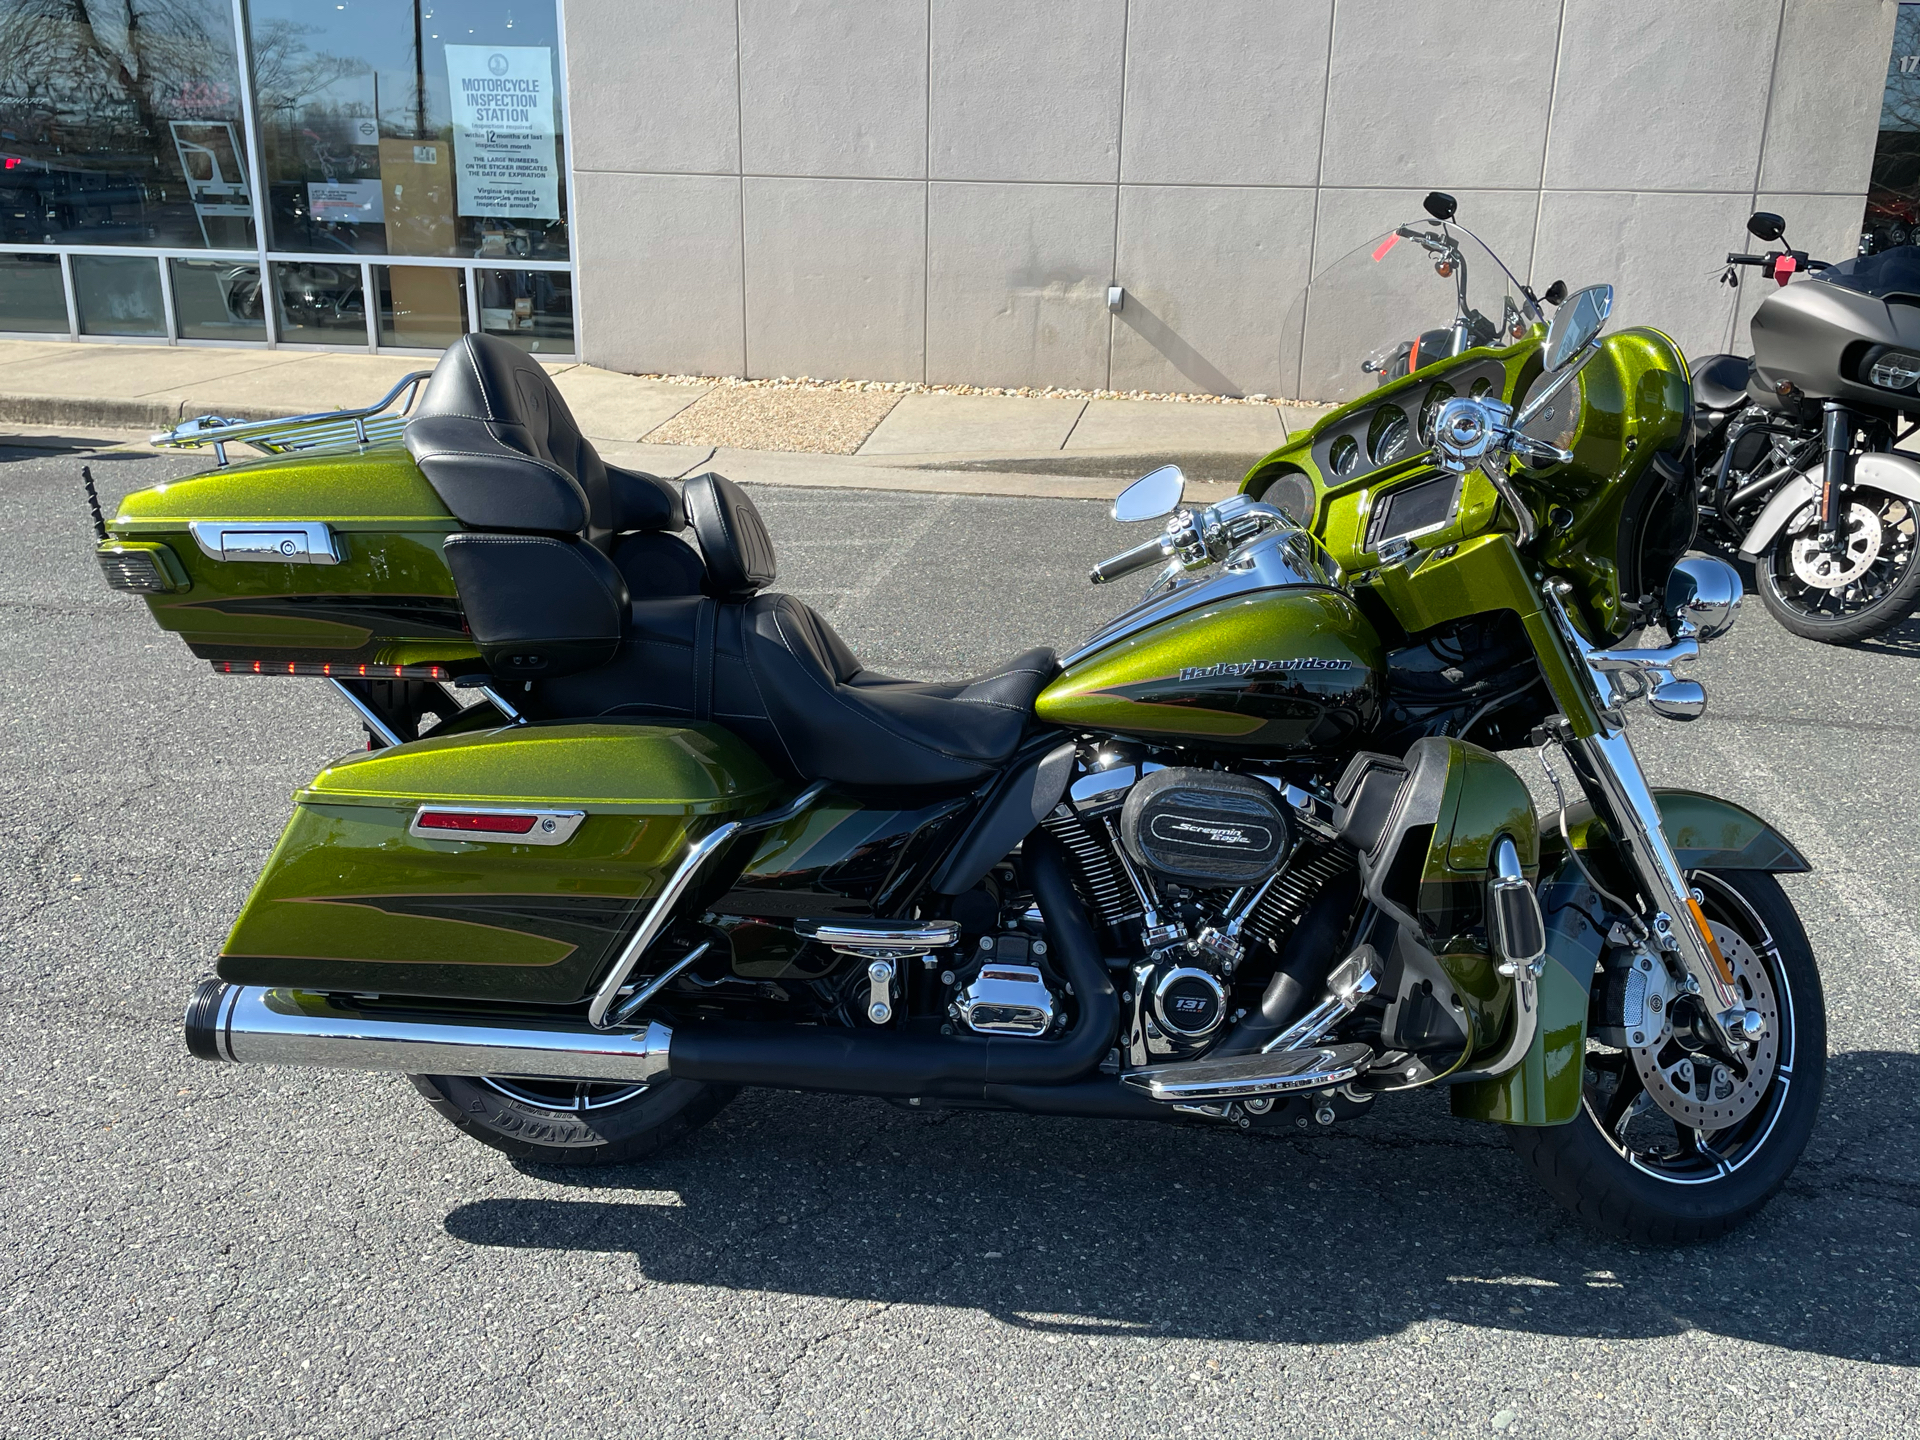 Used 2017 Harley Davidson Cvo Limited Spiked Olive Serpentine Green Motorcycles In Dumfries Va 960779